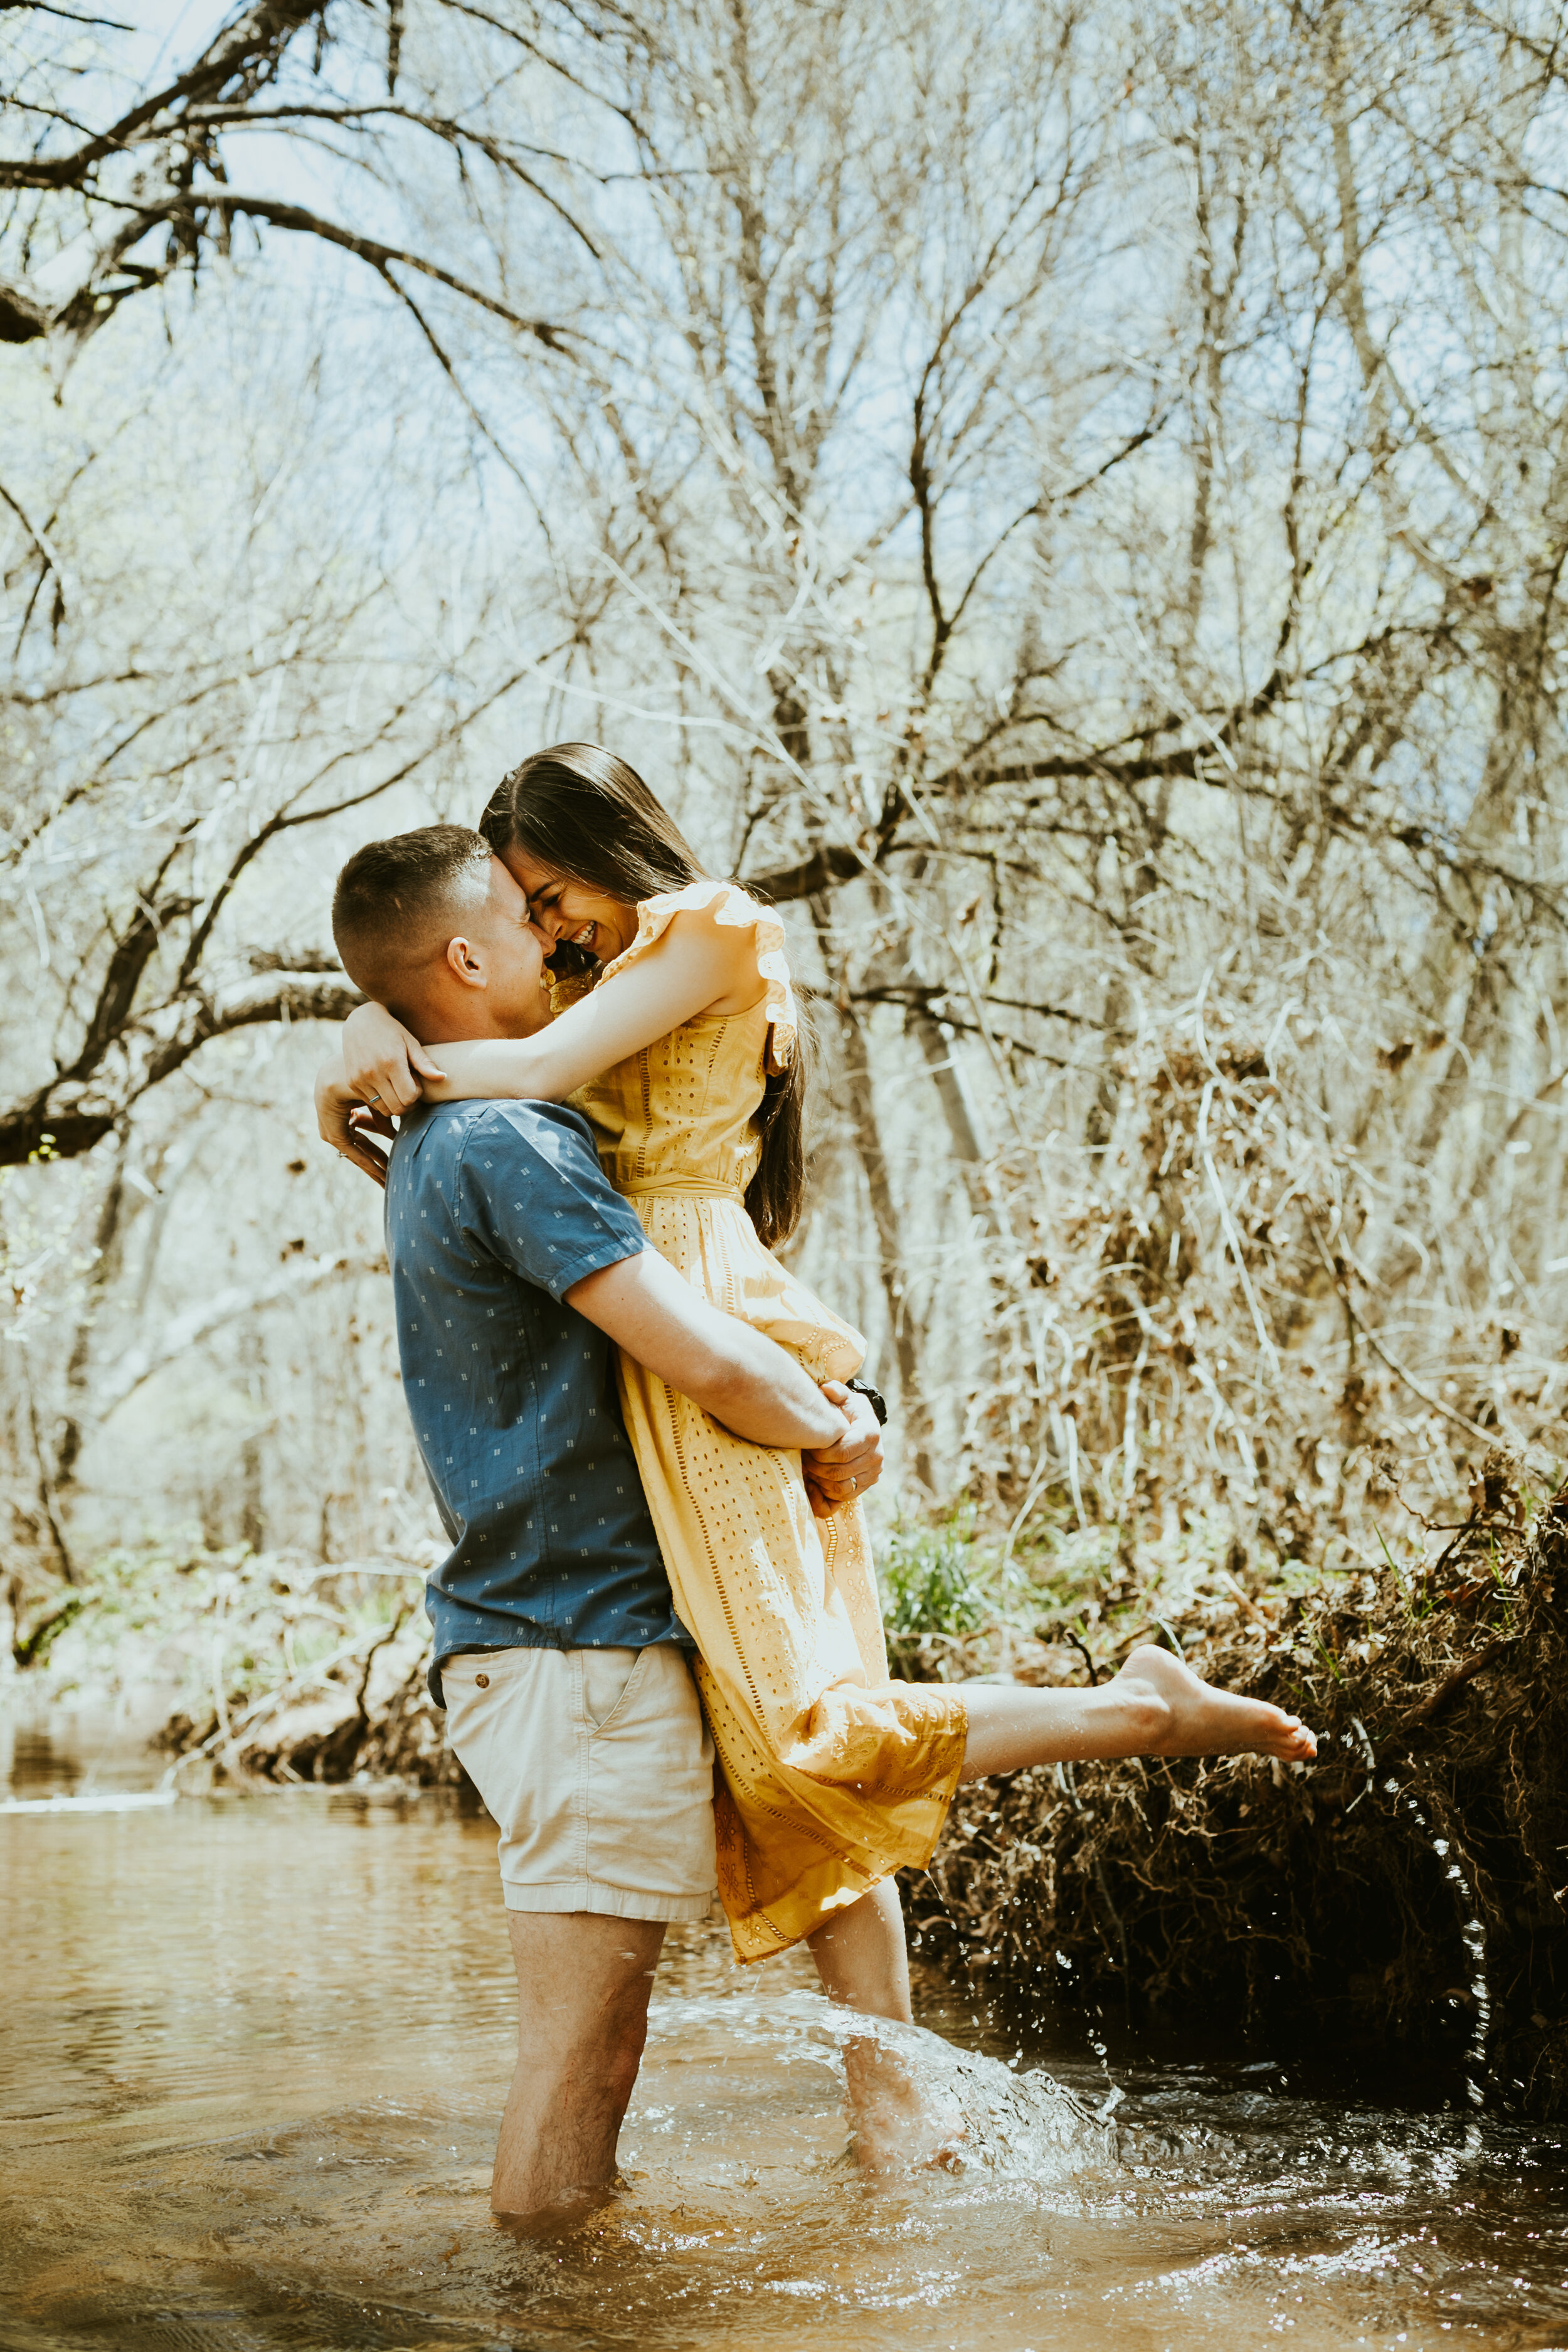 red rock crossing sedona arizona cathedral rock crescent moon ranch couple photos engagement photo outfit inspiration couple posing ideas midday photos anniversary photos-26.jpg